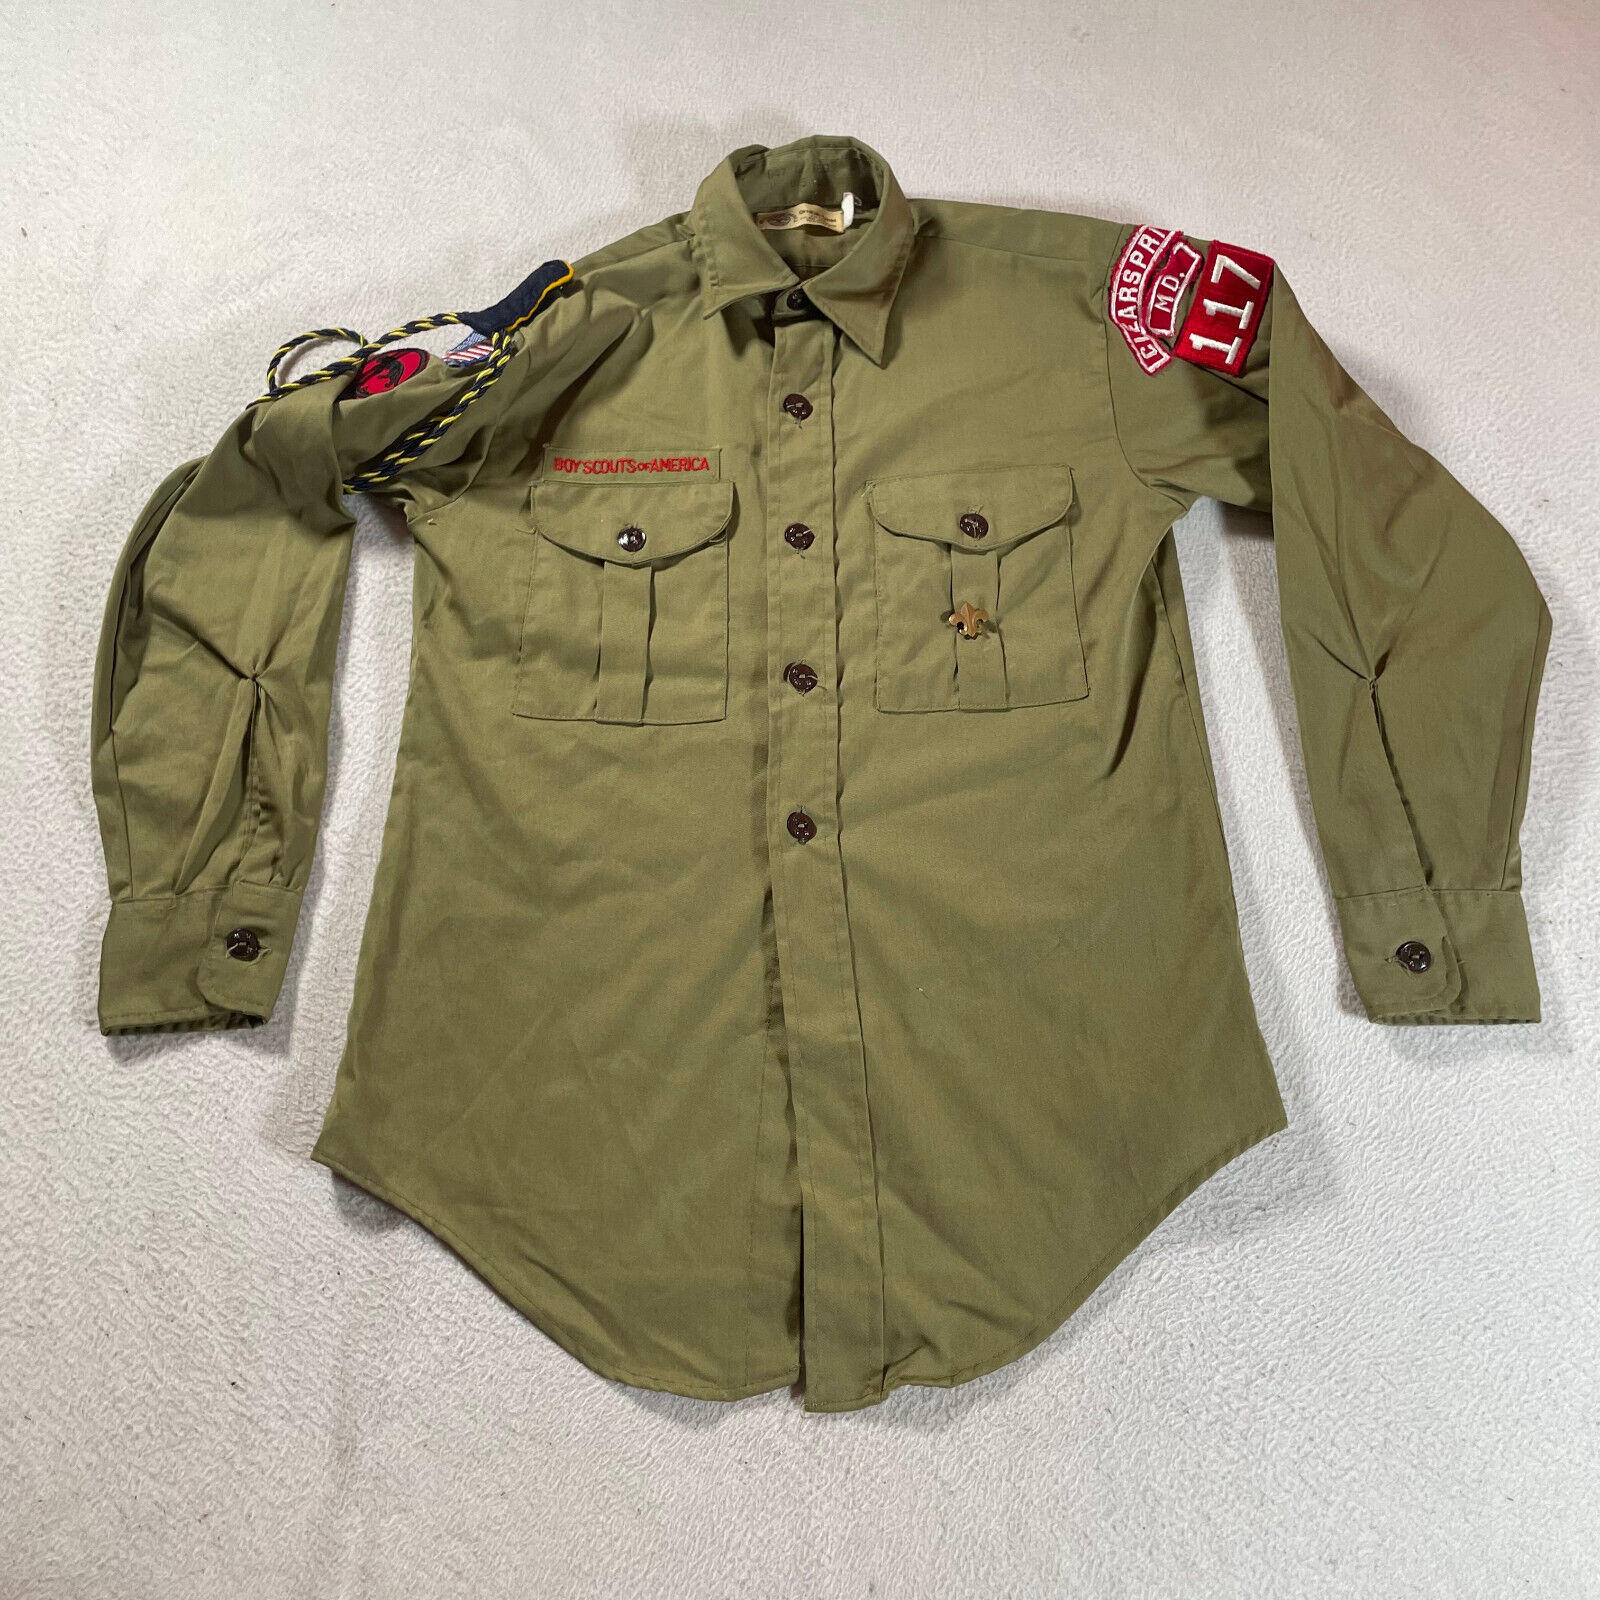 Vintage Boy Scouts Shirt Youth Large Green Uniform Button Down USA Patches Rare